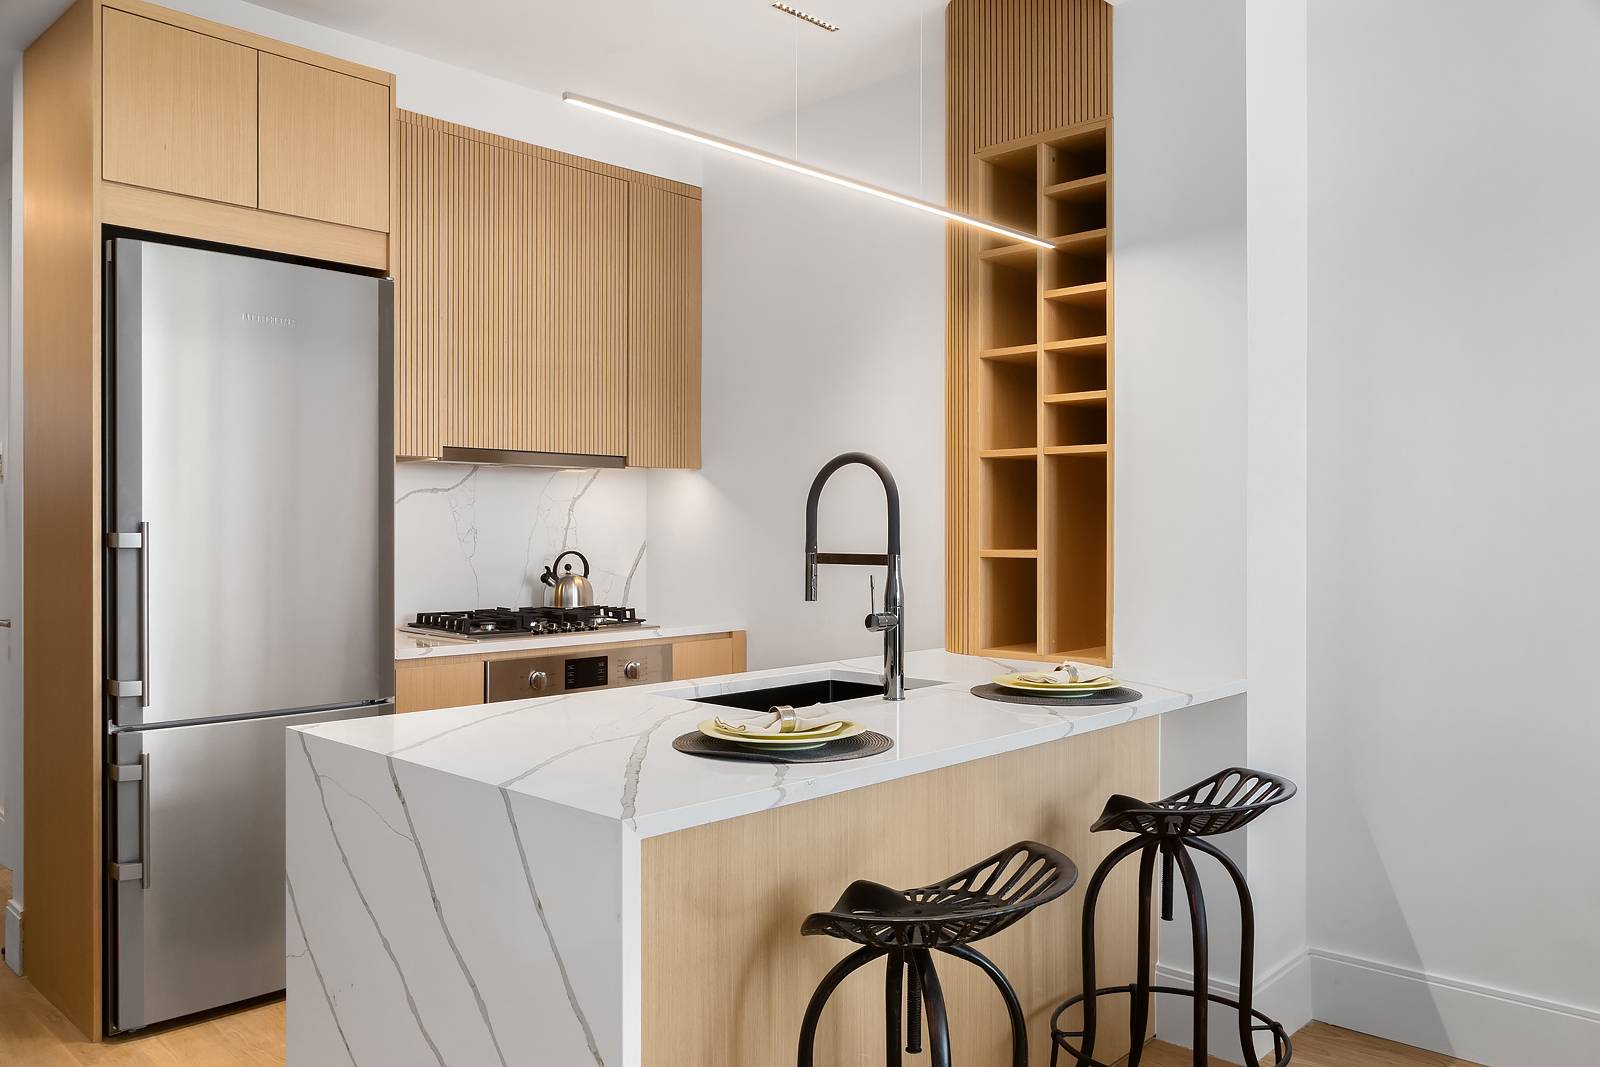 Graced with a charming Juliet balcony and a collection of contemporary fixtures and finishes, this brand new 2 bedroom, 2 bathroom home combines urban elegance with relaxed Greenpoint living in ...